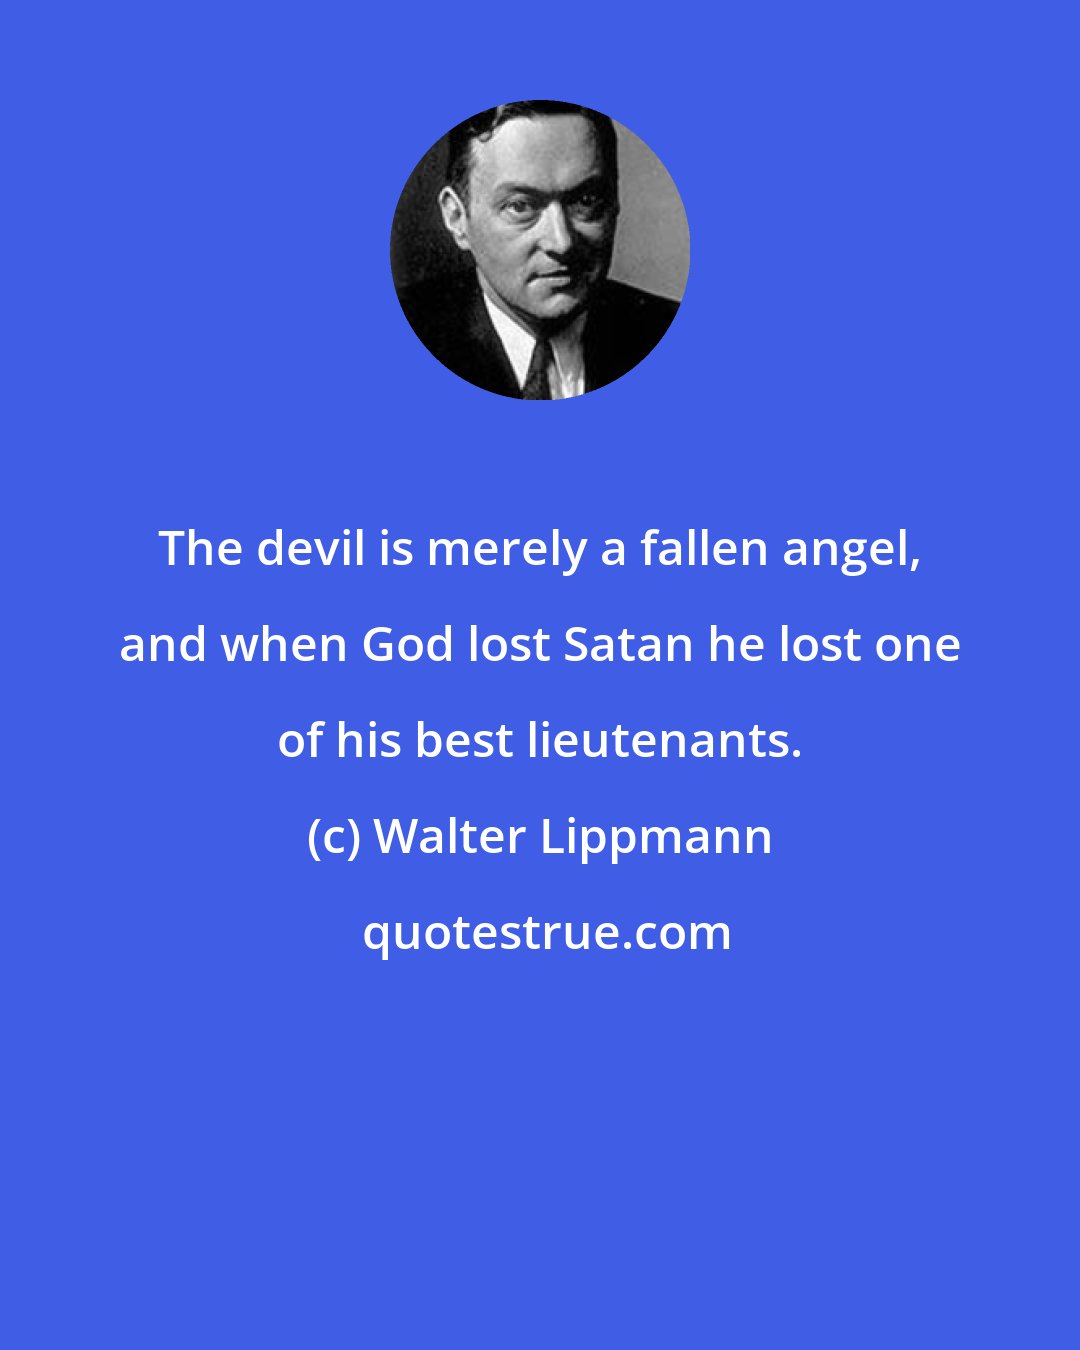 Walter Lippmann: The devil is merely a fallen angel, and when God lost Satan he lost one of his best lieutenants.